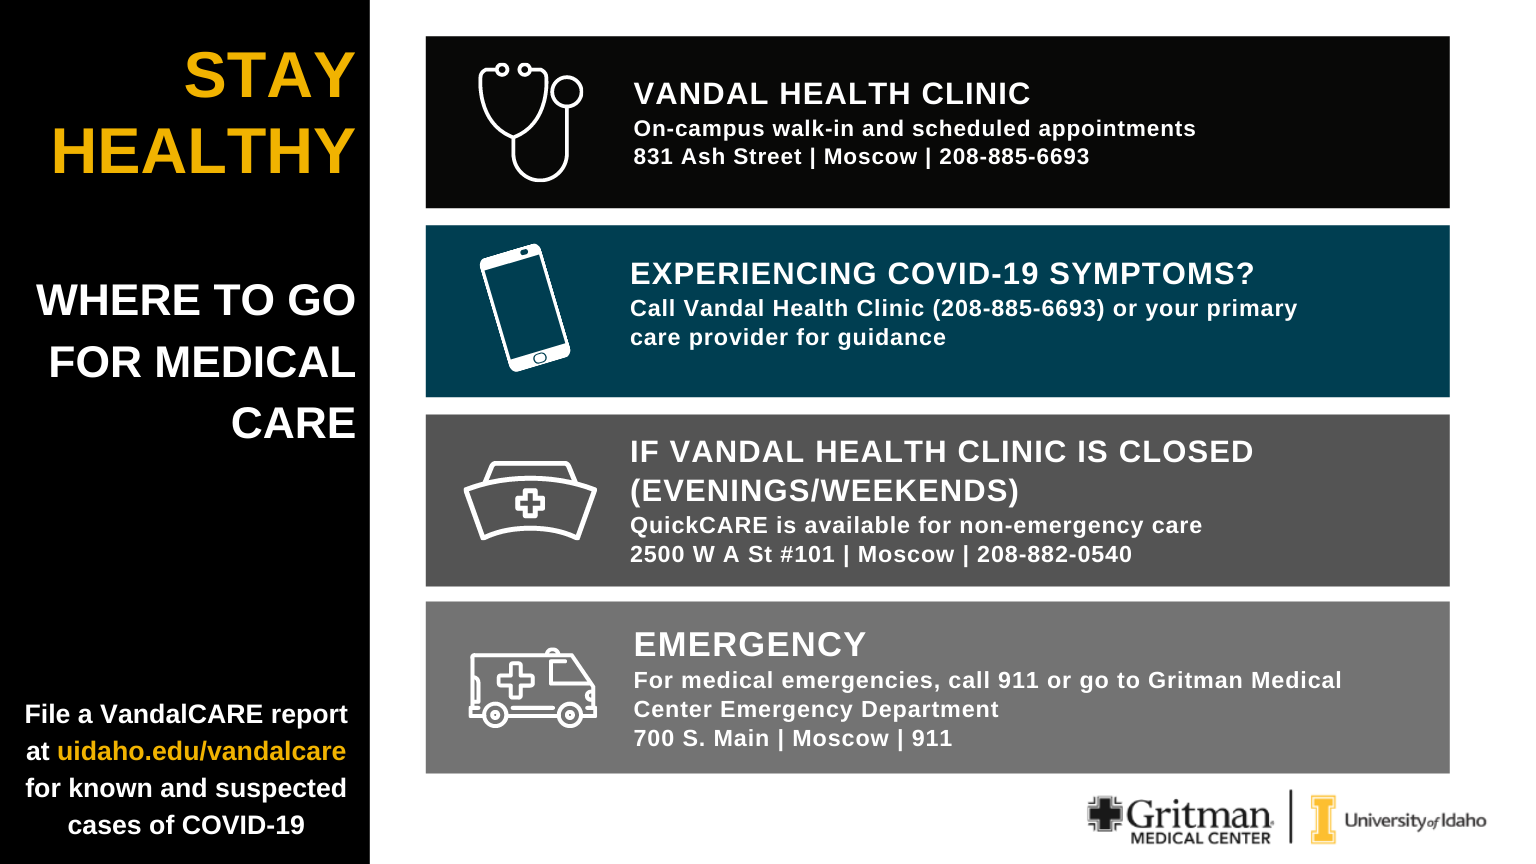 University of Idaho students, faculty and staff who are feeling ill should schedule an appointment with the Vandal Health Clinic. 